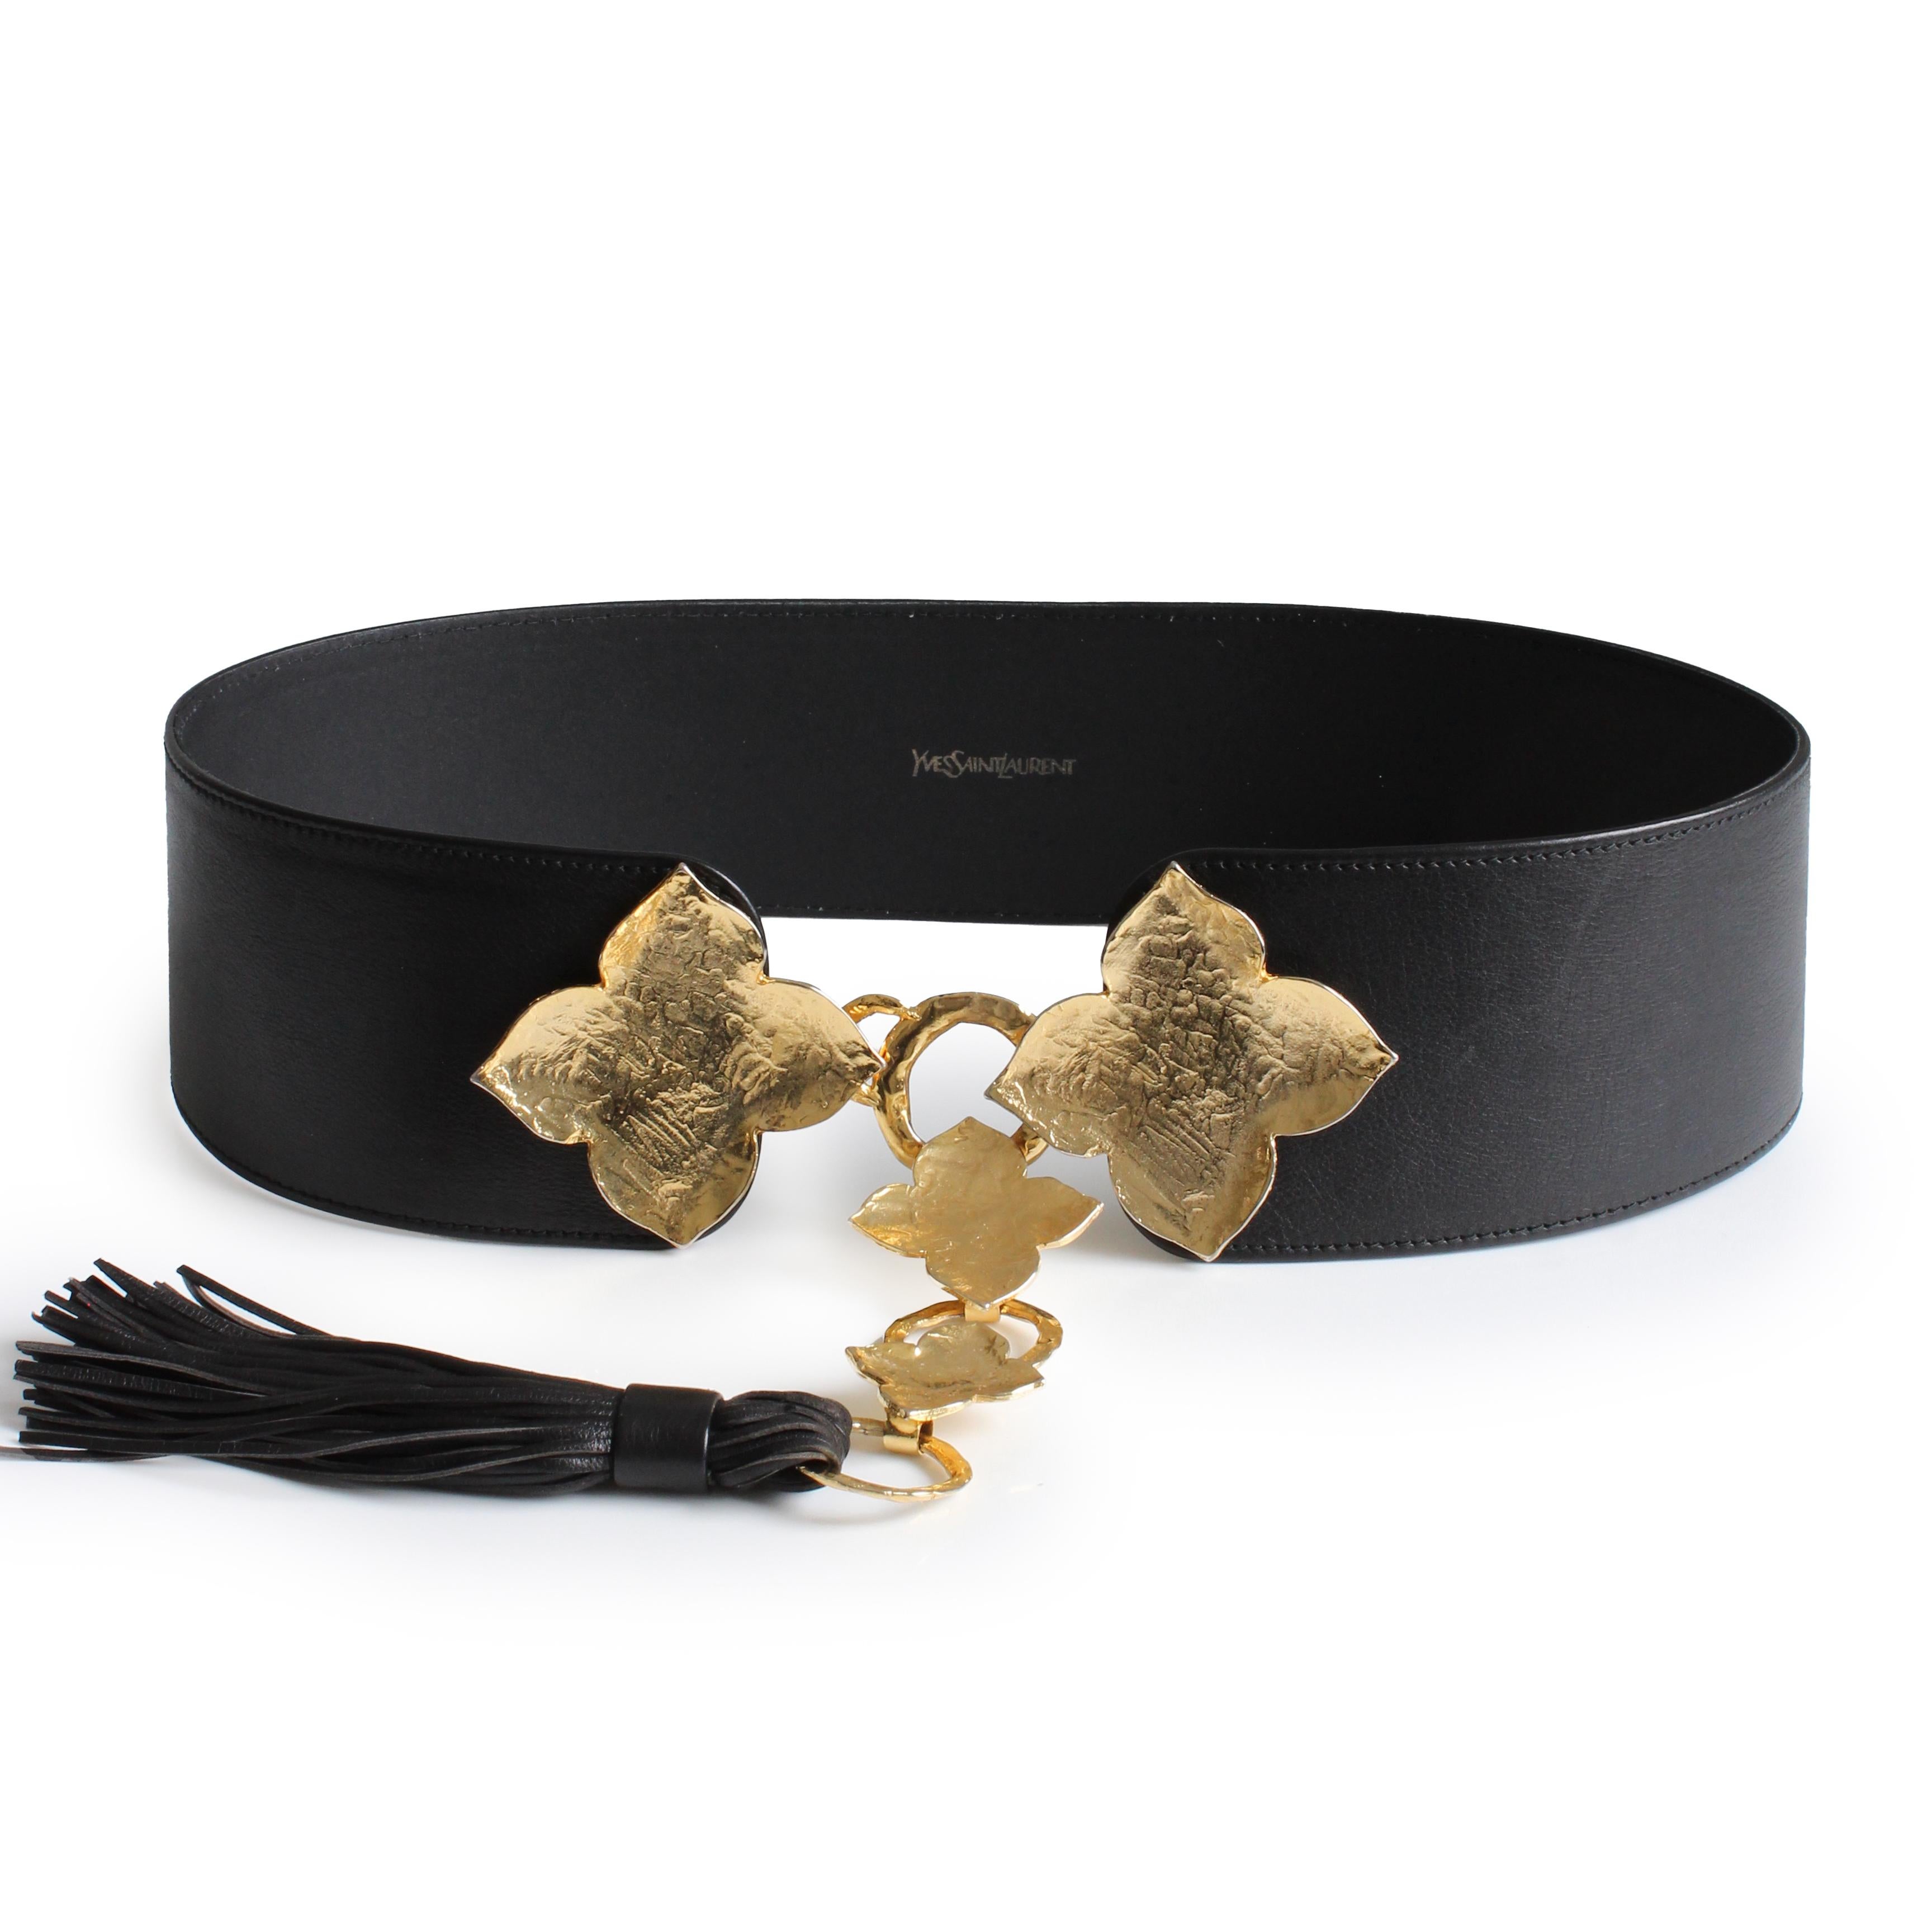 Yves Saint Laurent Wide Belt Oversized Abstract Gold Leaf with Tassel Sz L  In Good Condition For Sale In Port Saint Lucie, FL